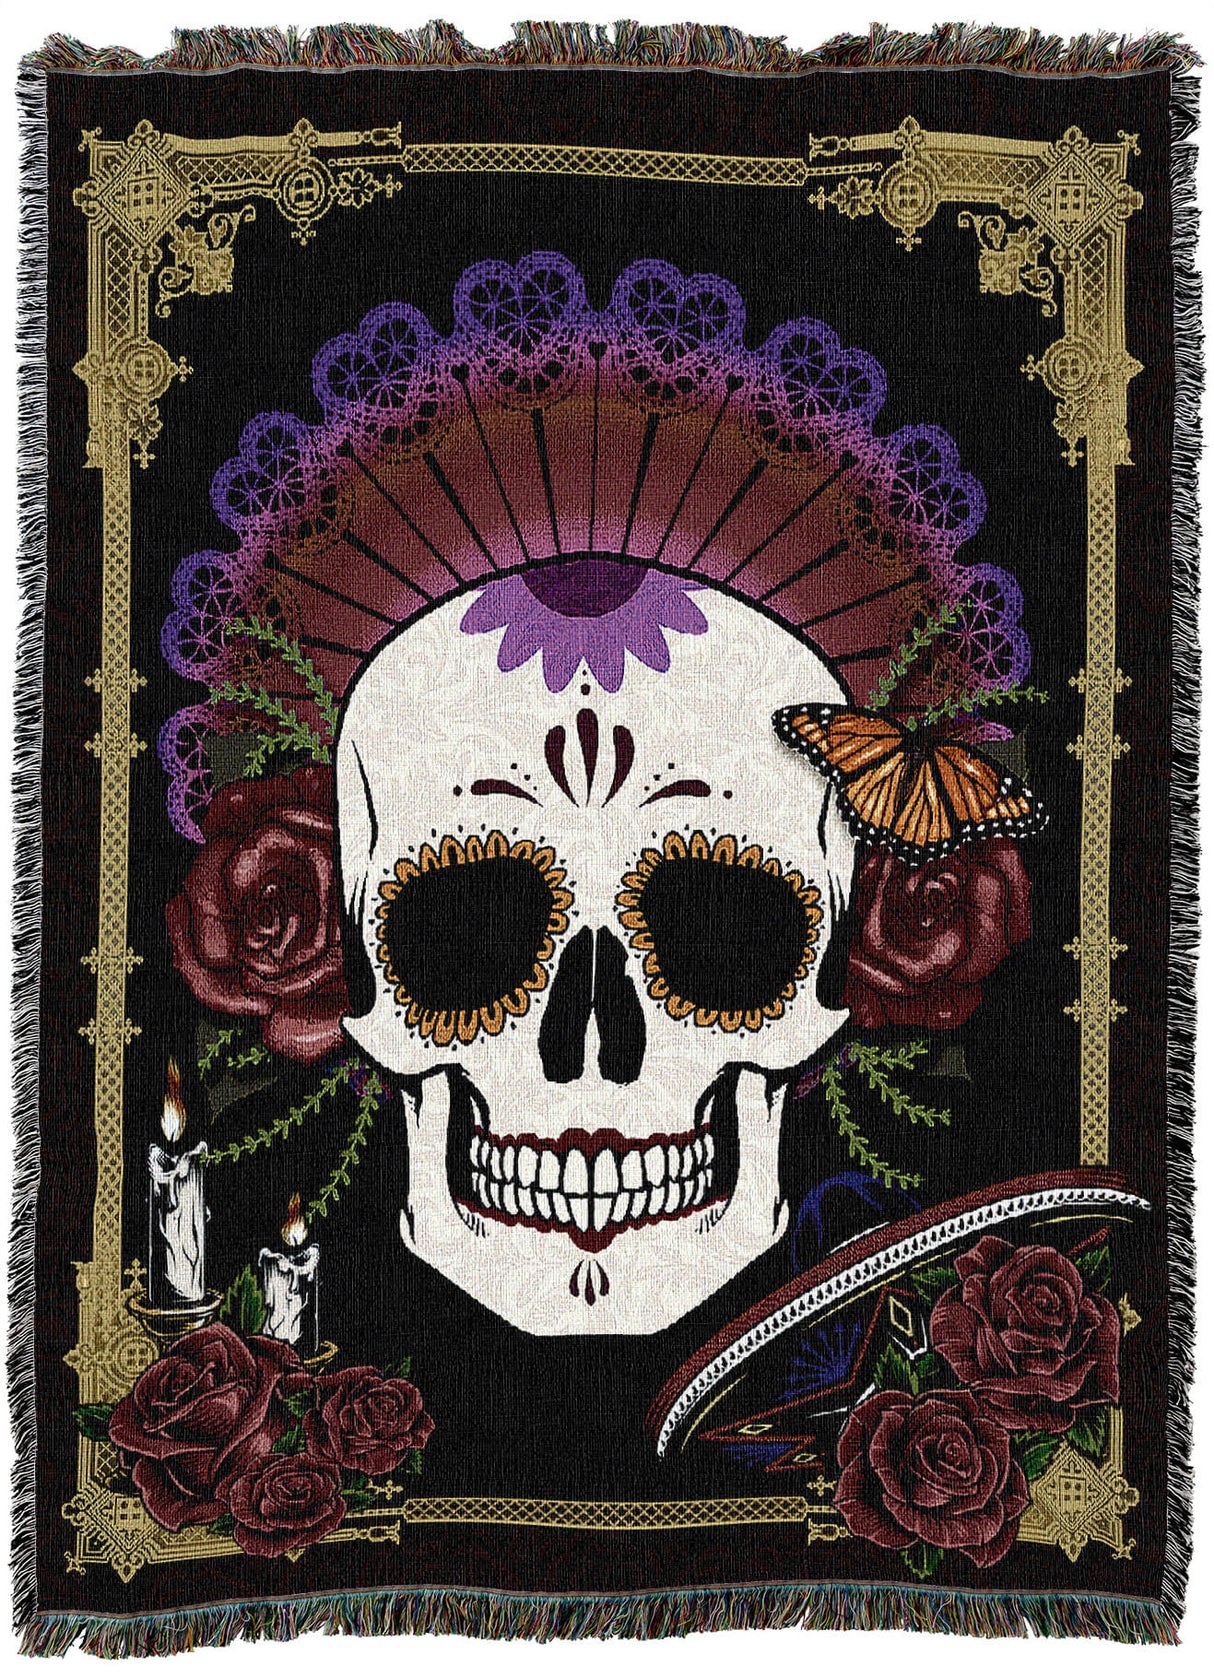 Tapestry blanket showing a grinning skull with flowers and a butterfly on a black background with gold border